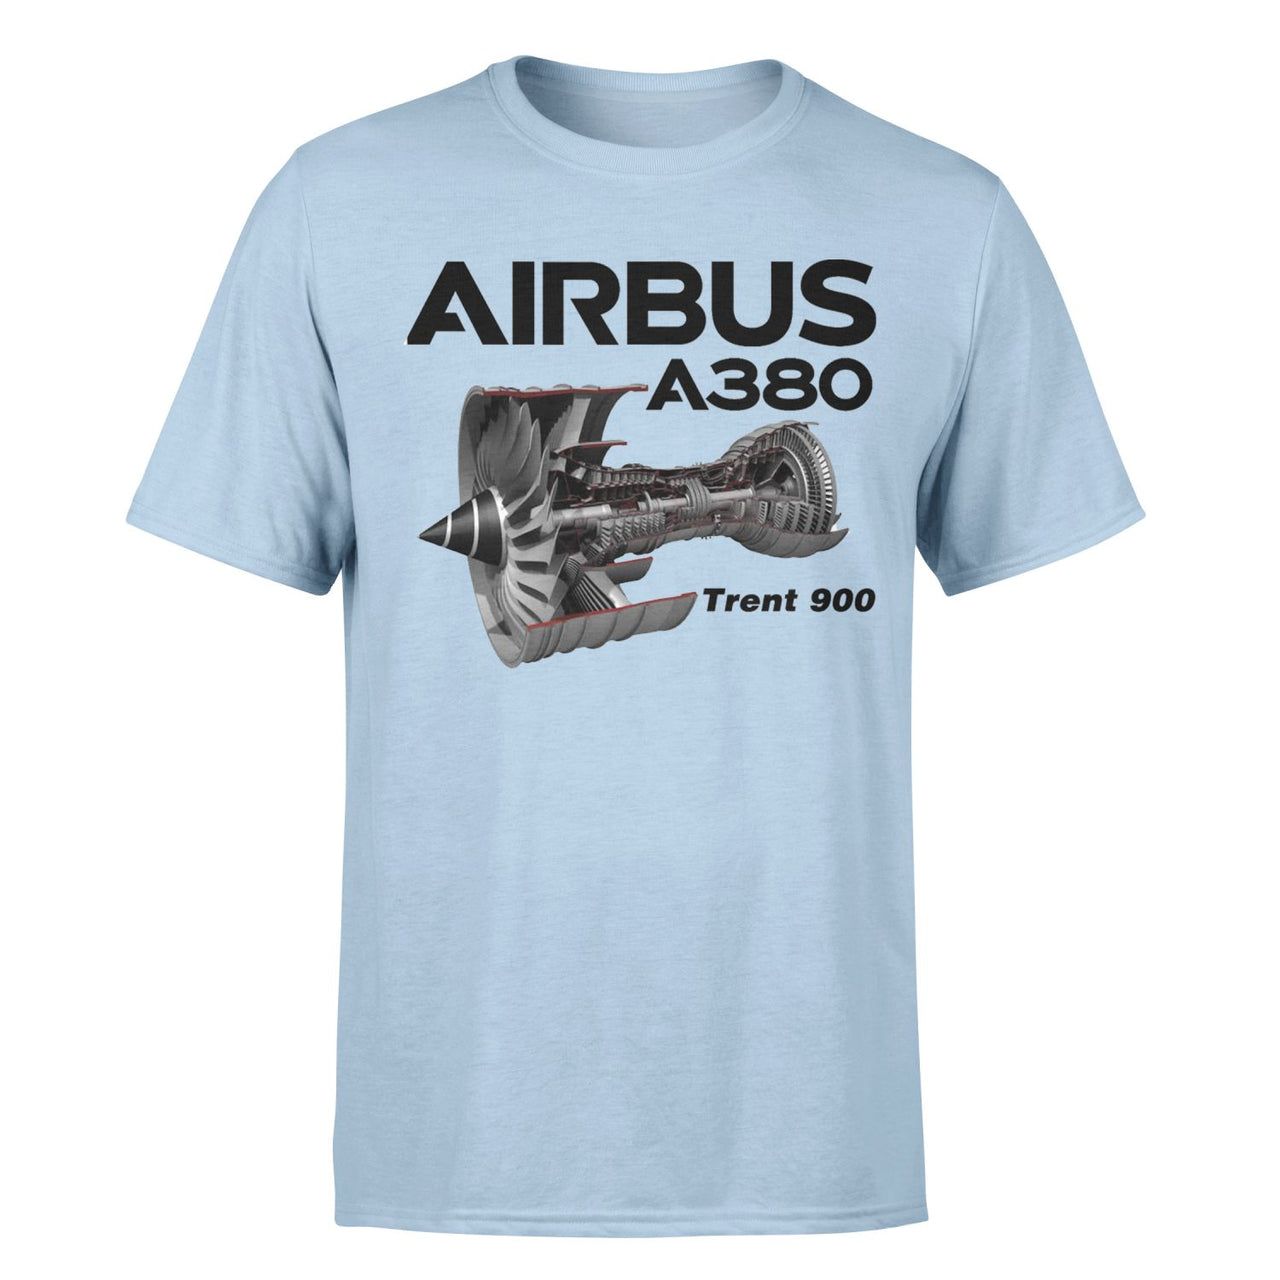 Airbus A380 & Trent 900 Engine Designed T-Shirts